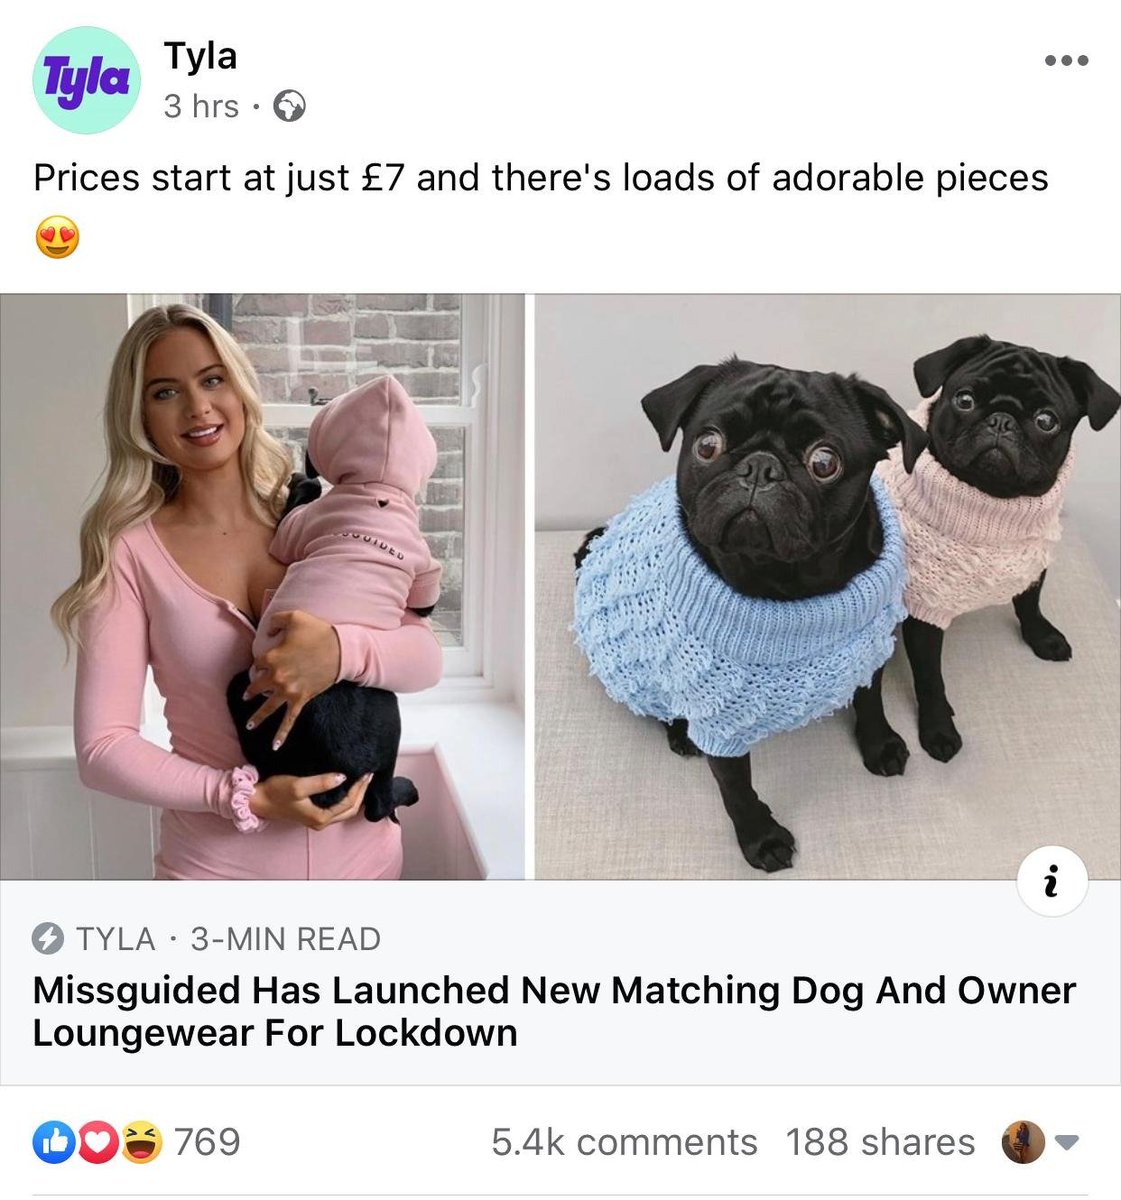 The internal MG team are on it! it's important for in-house marketers to be just as reactive as us agency lot. We even had TYLA contact US (not us contact them) this morning for info on our lockdown loungewear for dogs which landed a link this AM (and so much social engagement)